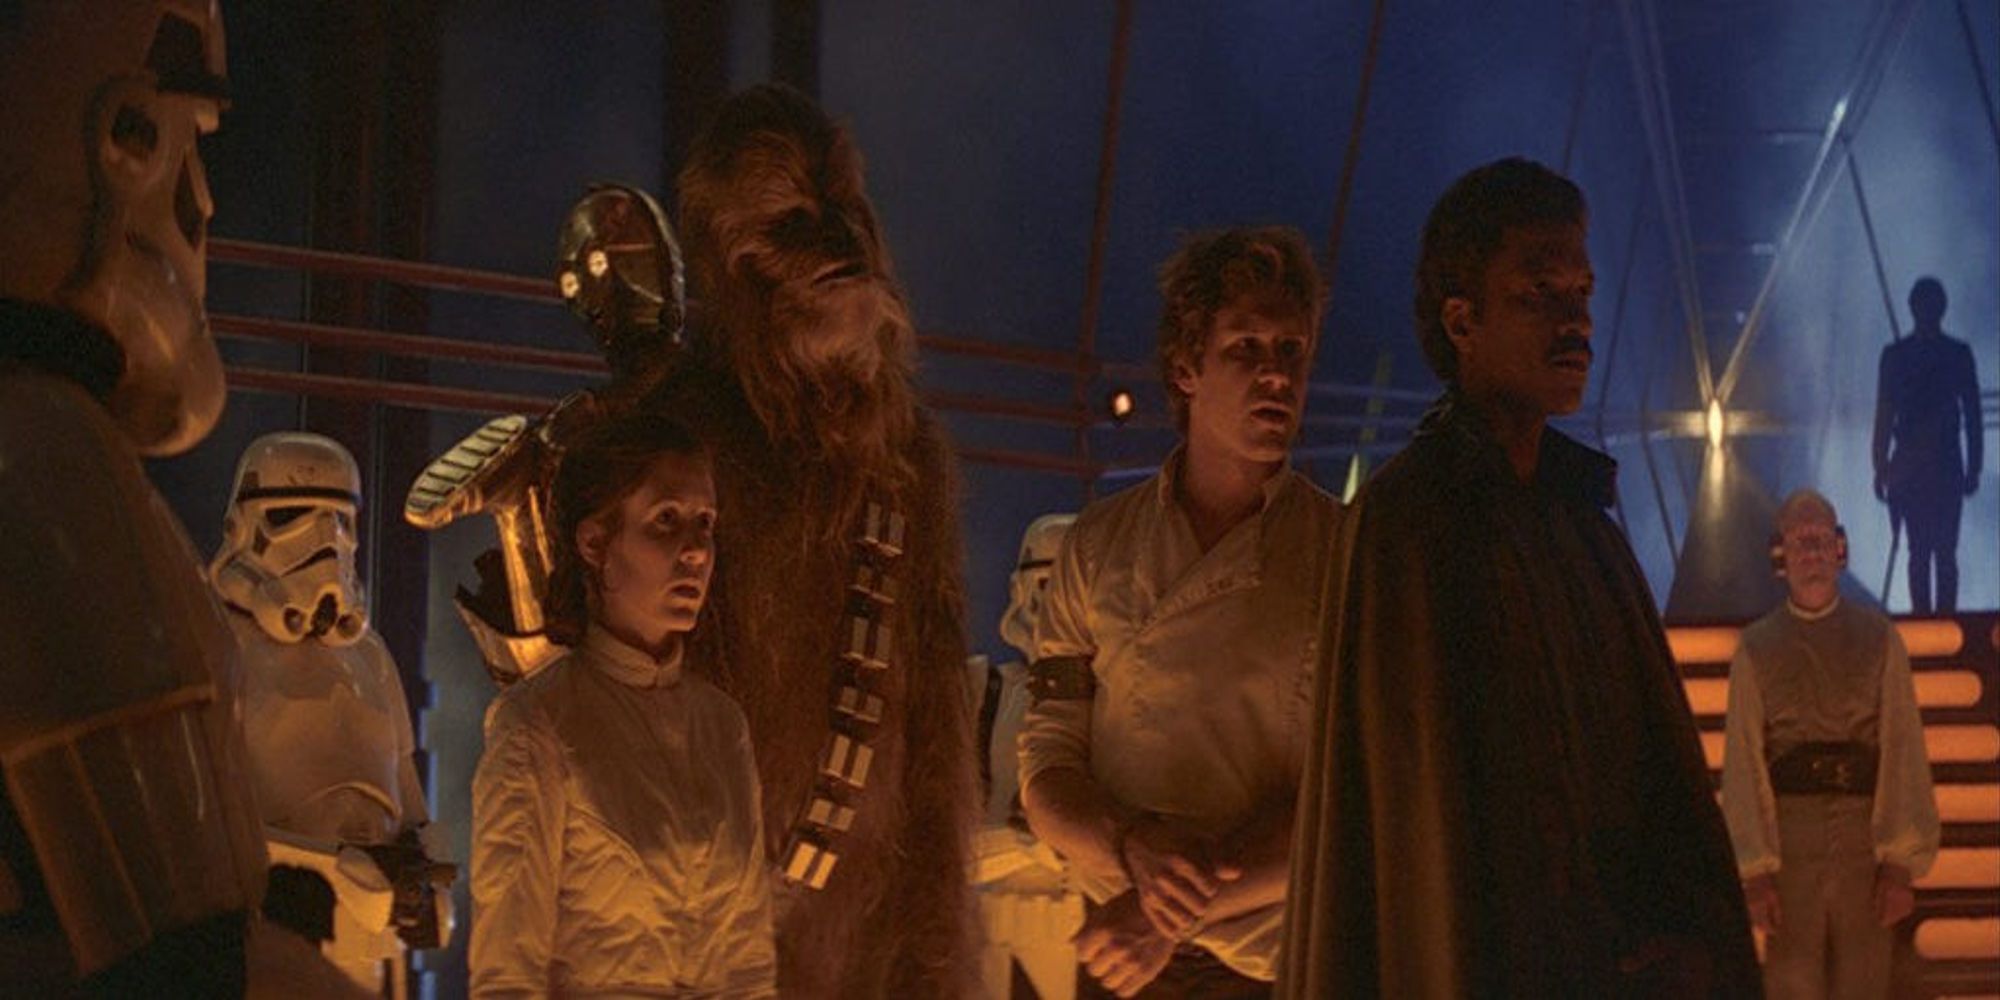 Han, Lando, Leia, Chewbacca, and C-3PO stand in the carbon freezing chamber